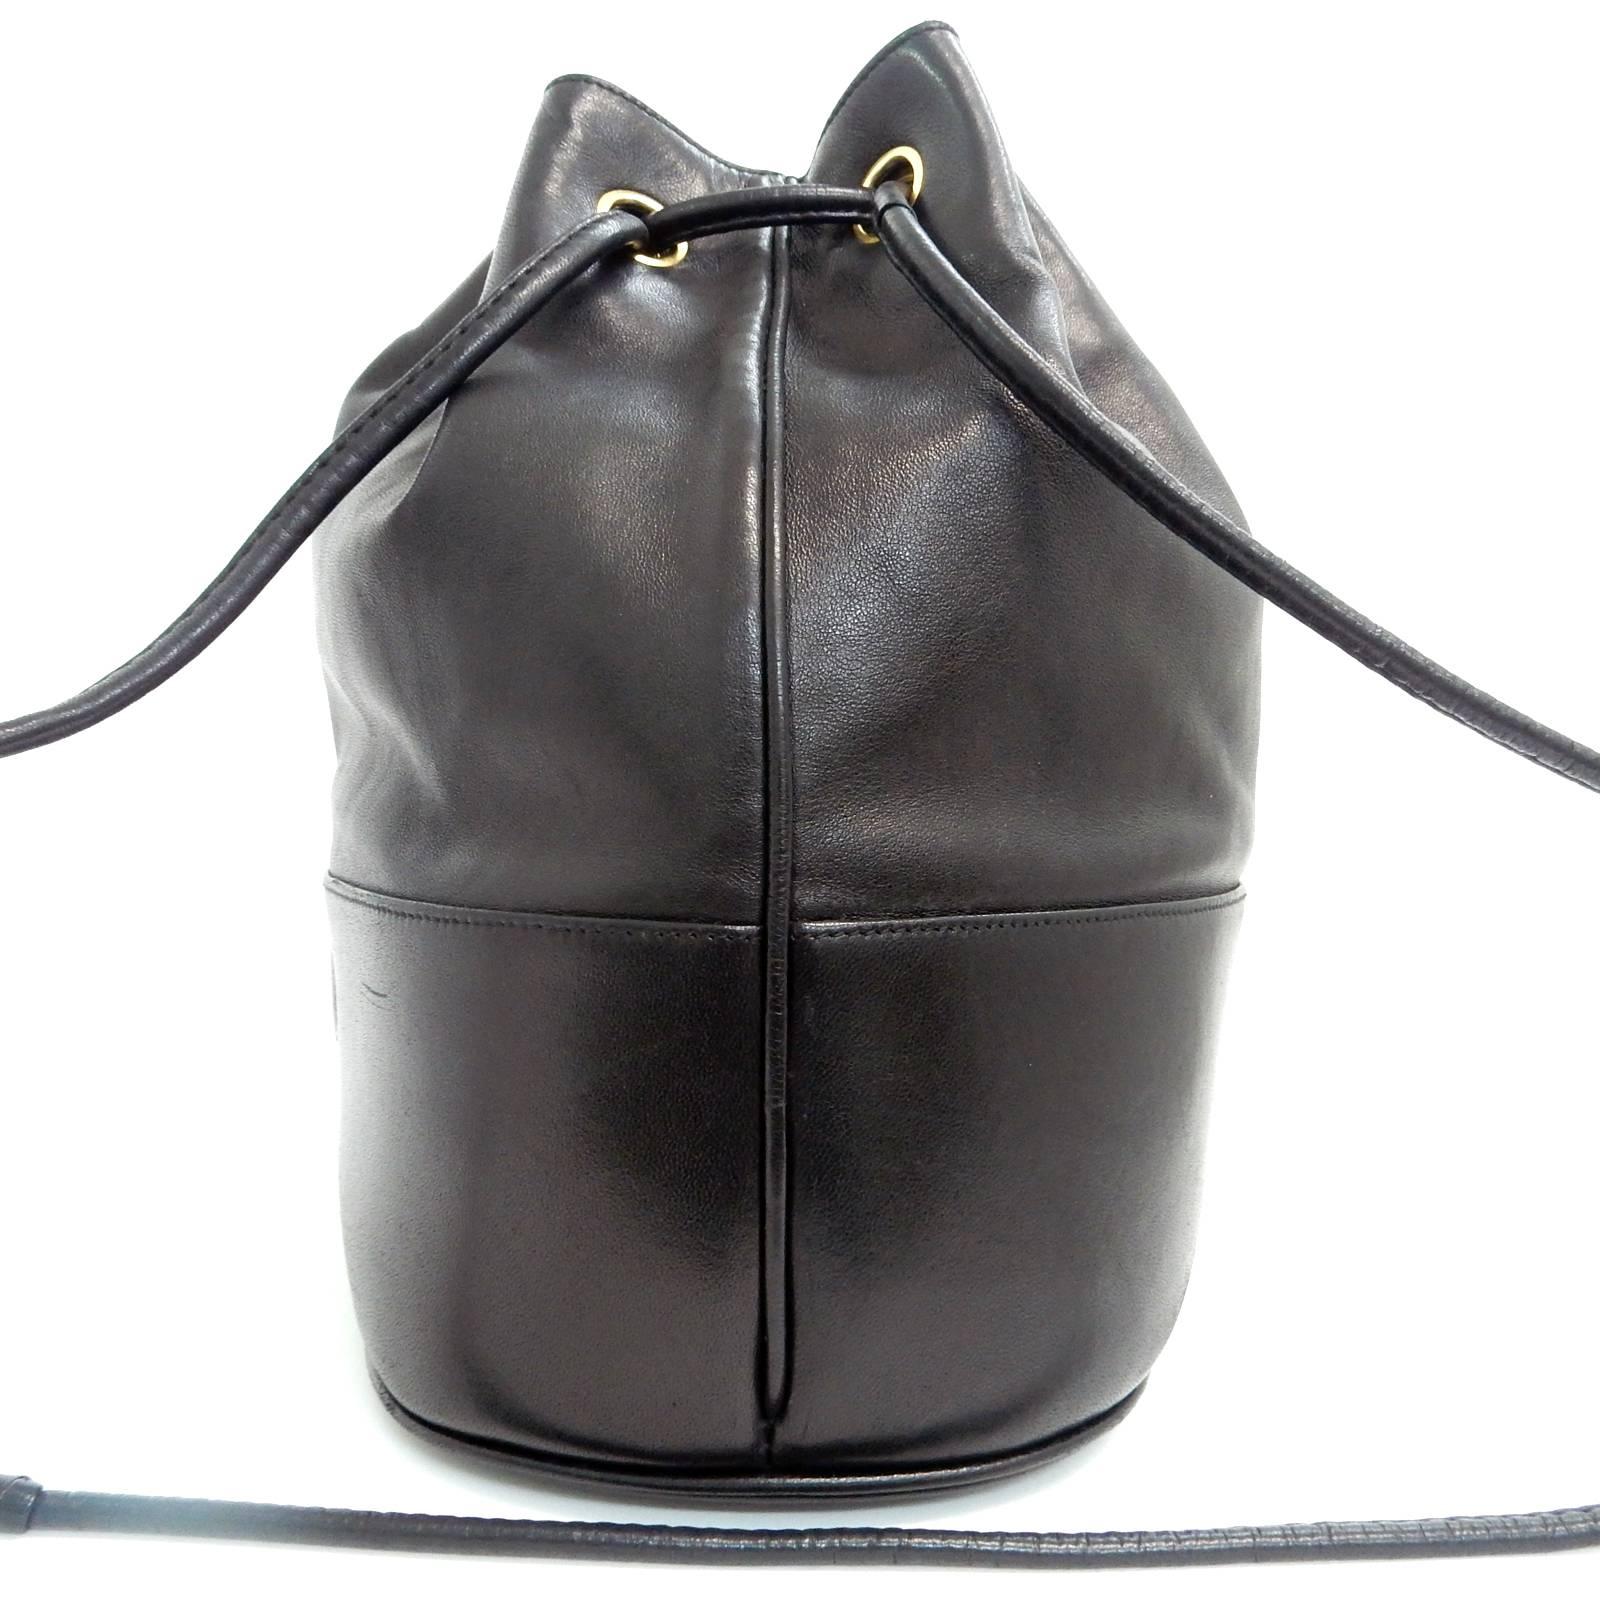 - Vintage early 90s Chanel black lambskin leather drawstring bucket shoulder bag with a pouch bag. Featuring a black "CC" logo on the base of the bag, two gold toned hardware "CC" logo drawstring closure. A very chic and classic